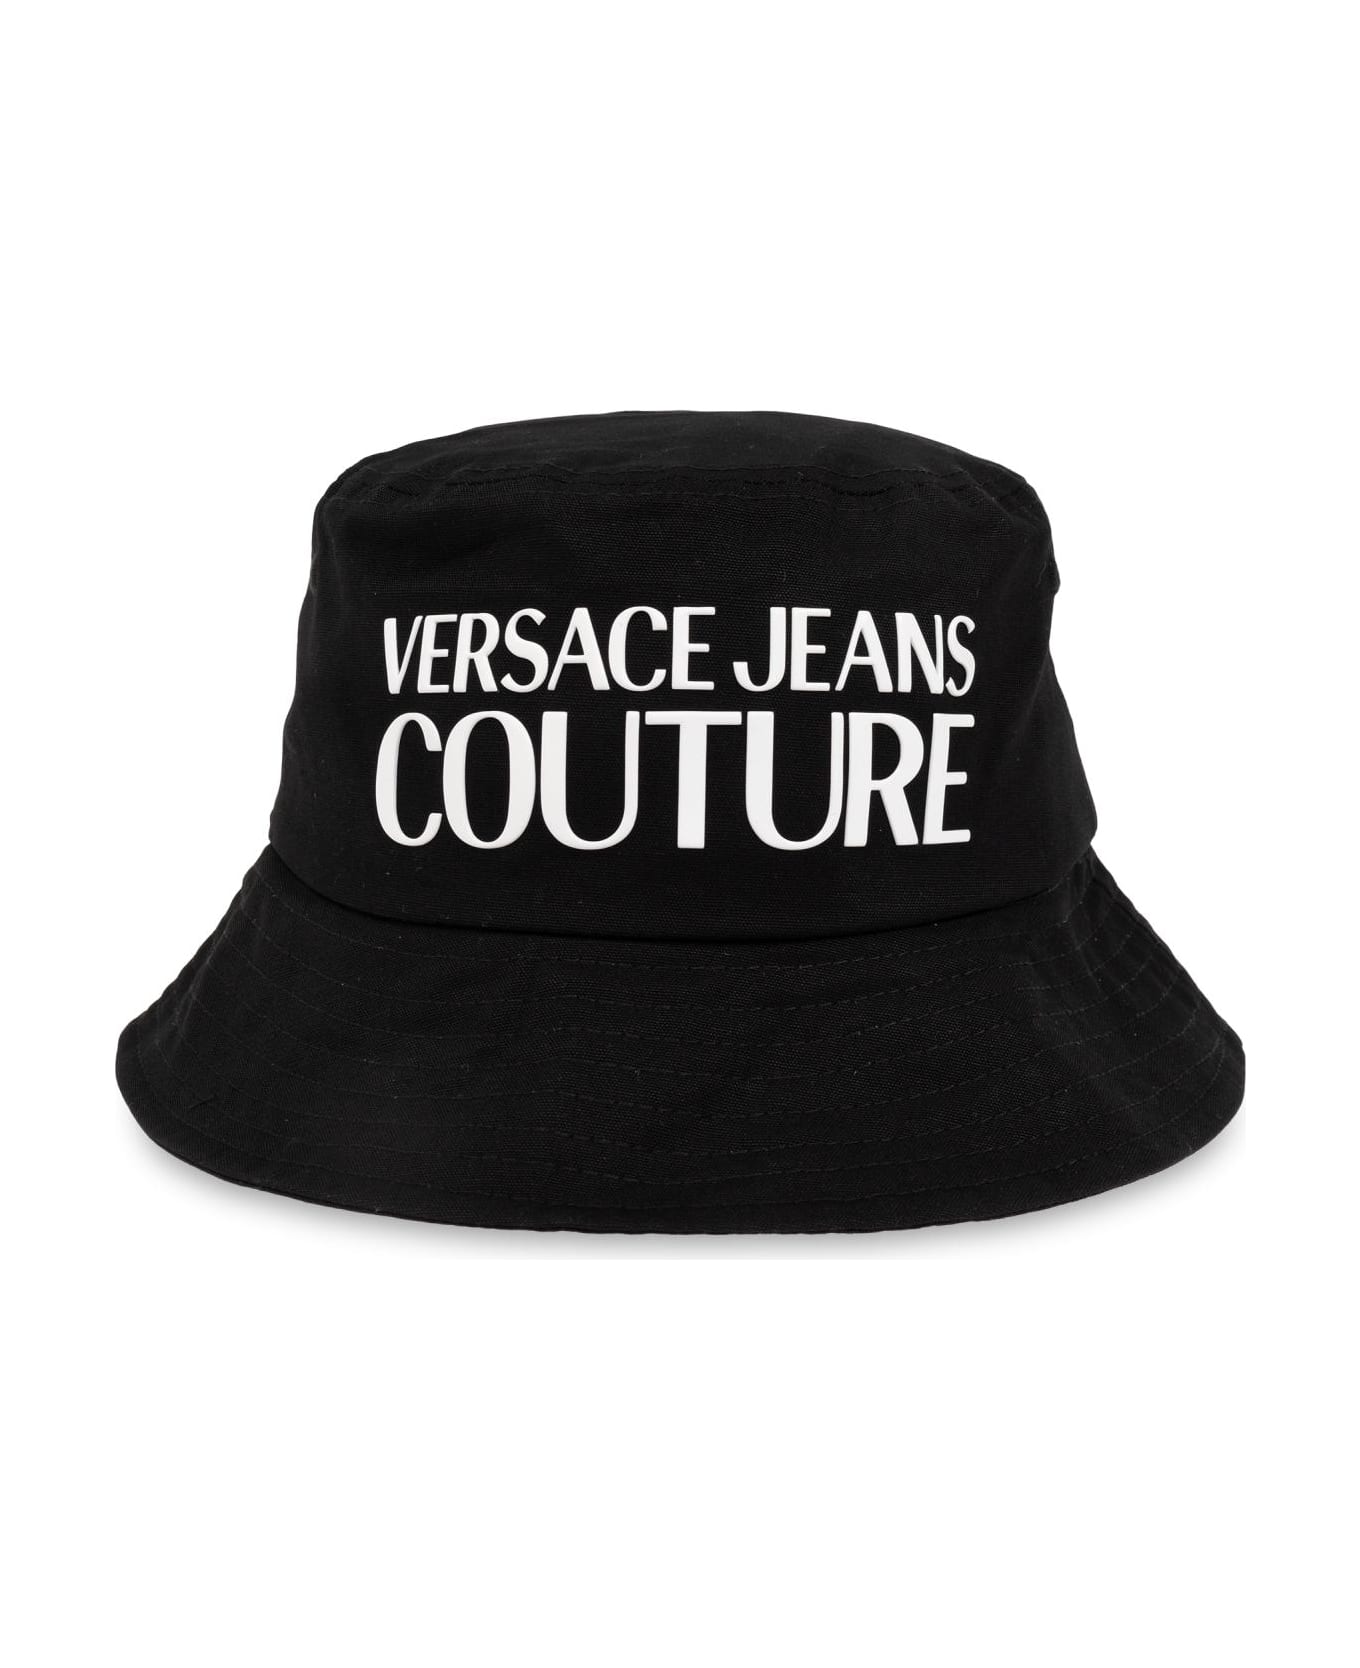 Versace Jeans Couture Bucket Hat With Logo - Black